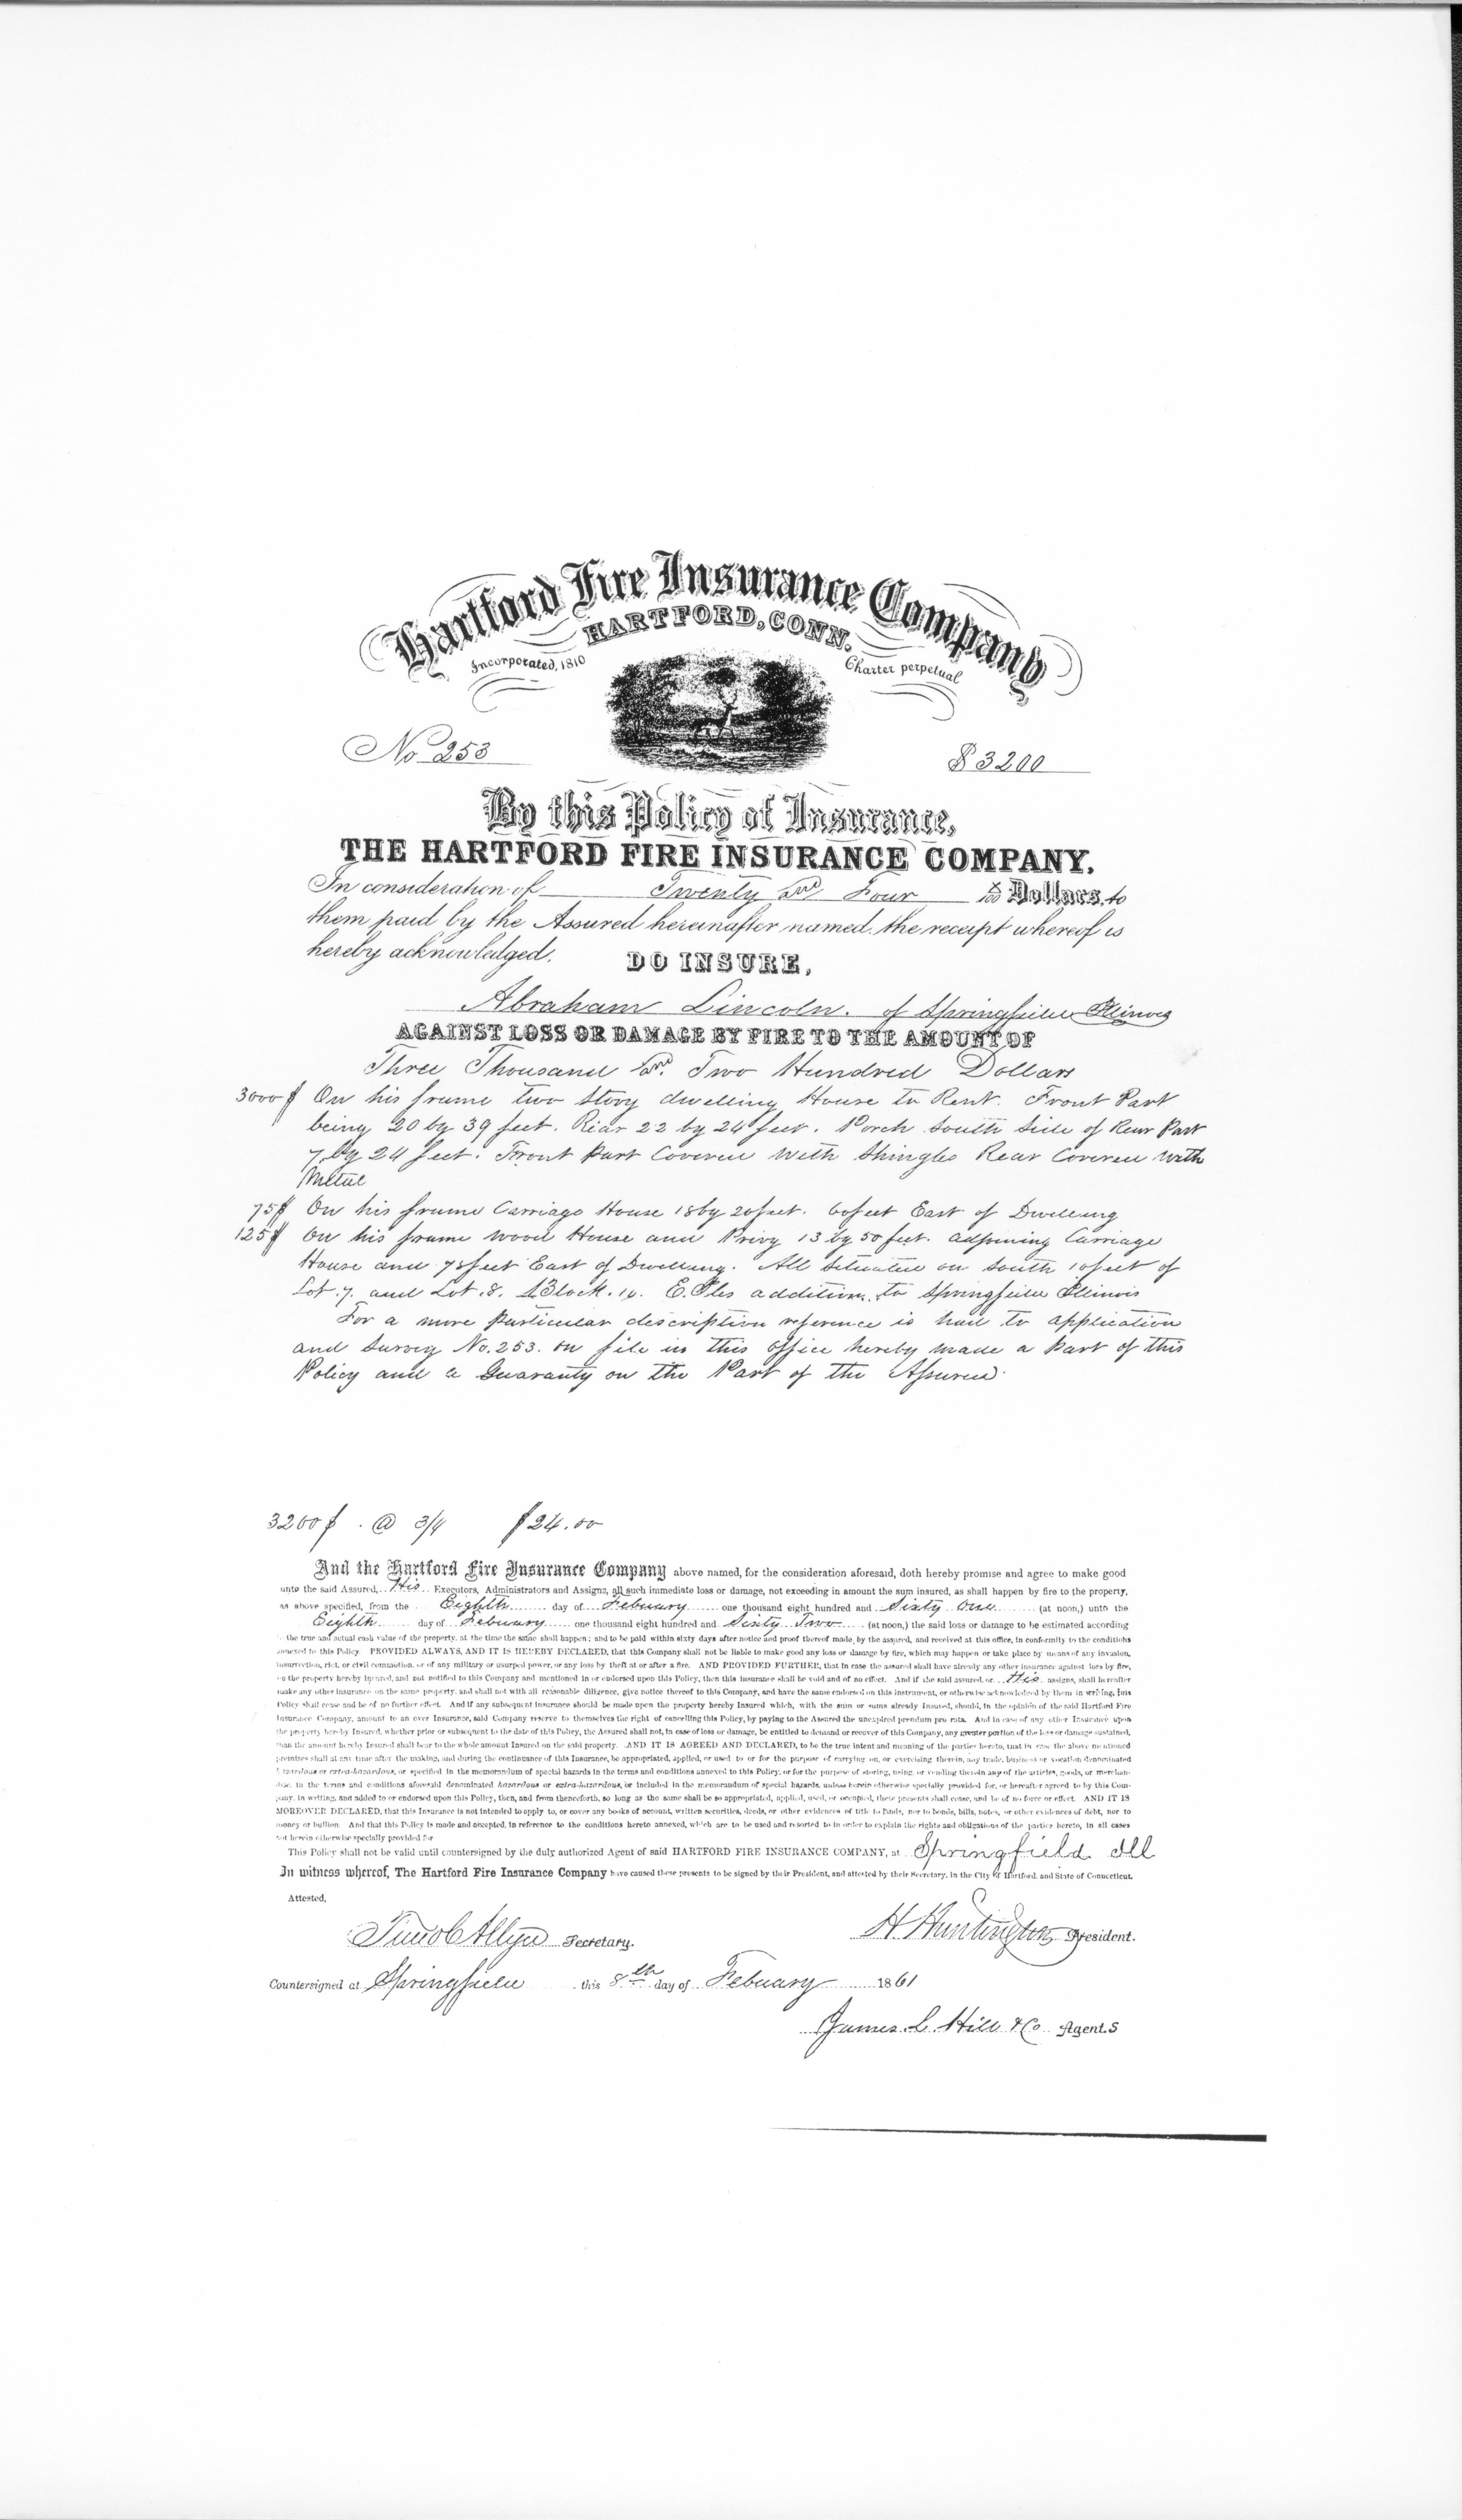 Scan of Hartford Fire Insurance Company document taken out on Lincoln's house and outbuildings on Feb. 8, 1861 Original document owned by Hartford Fire Insurance Company Lincoln Home, insurance, scan